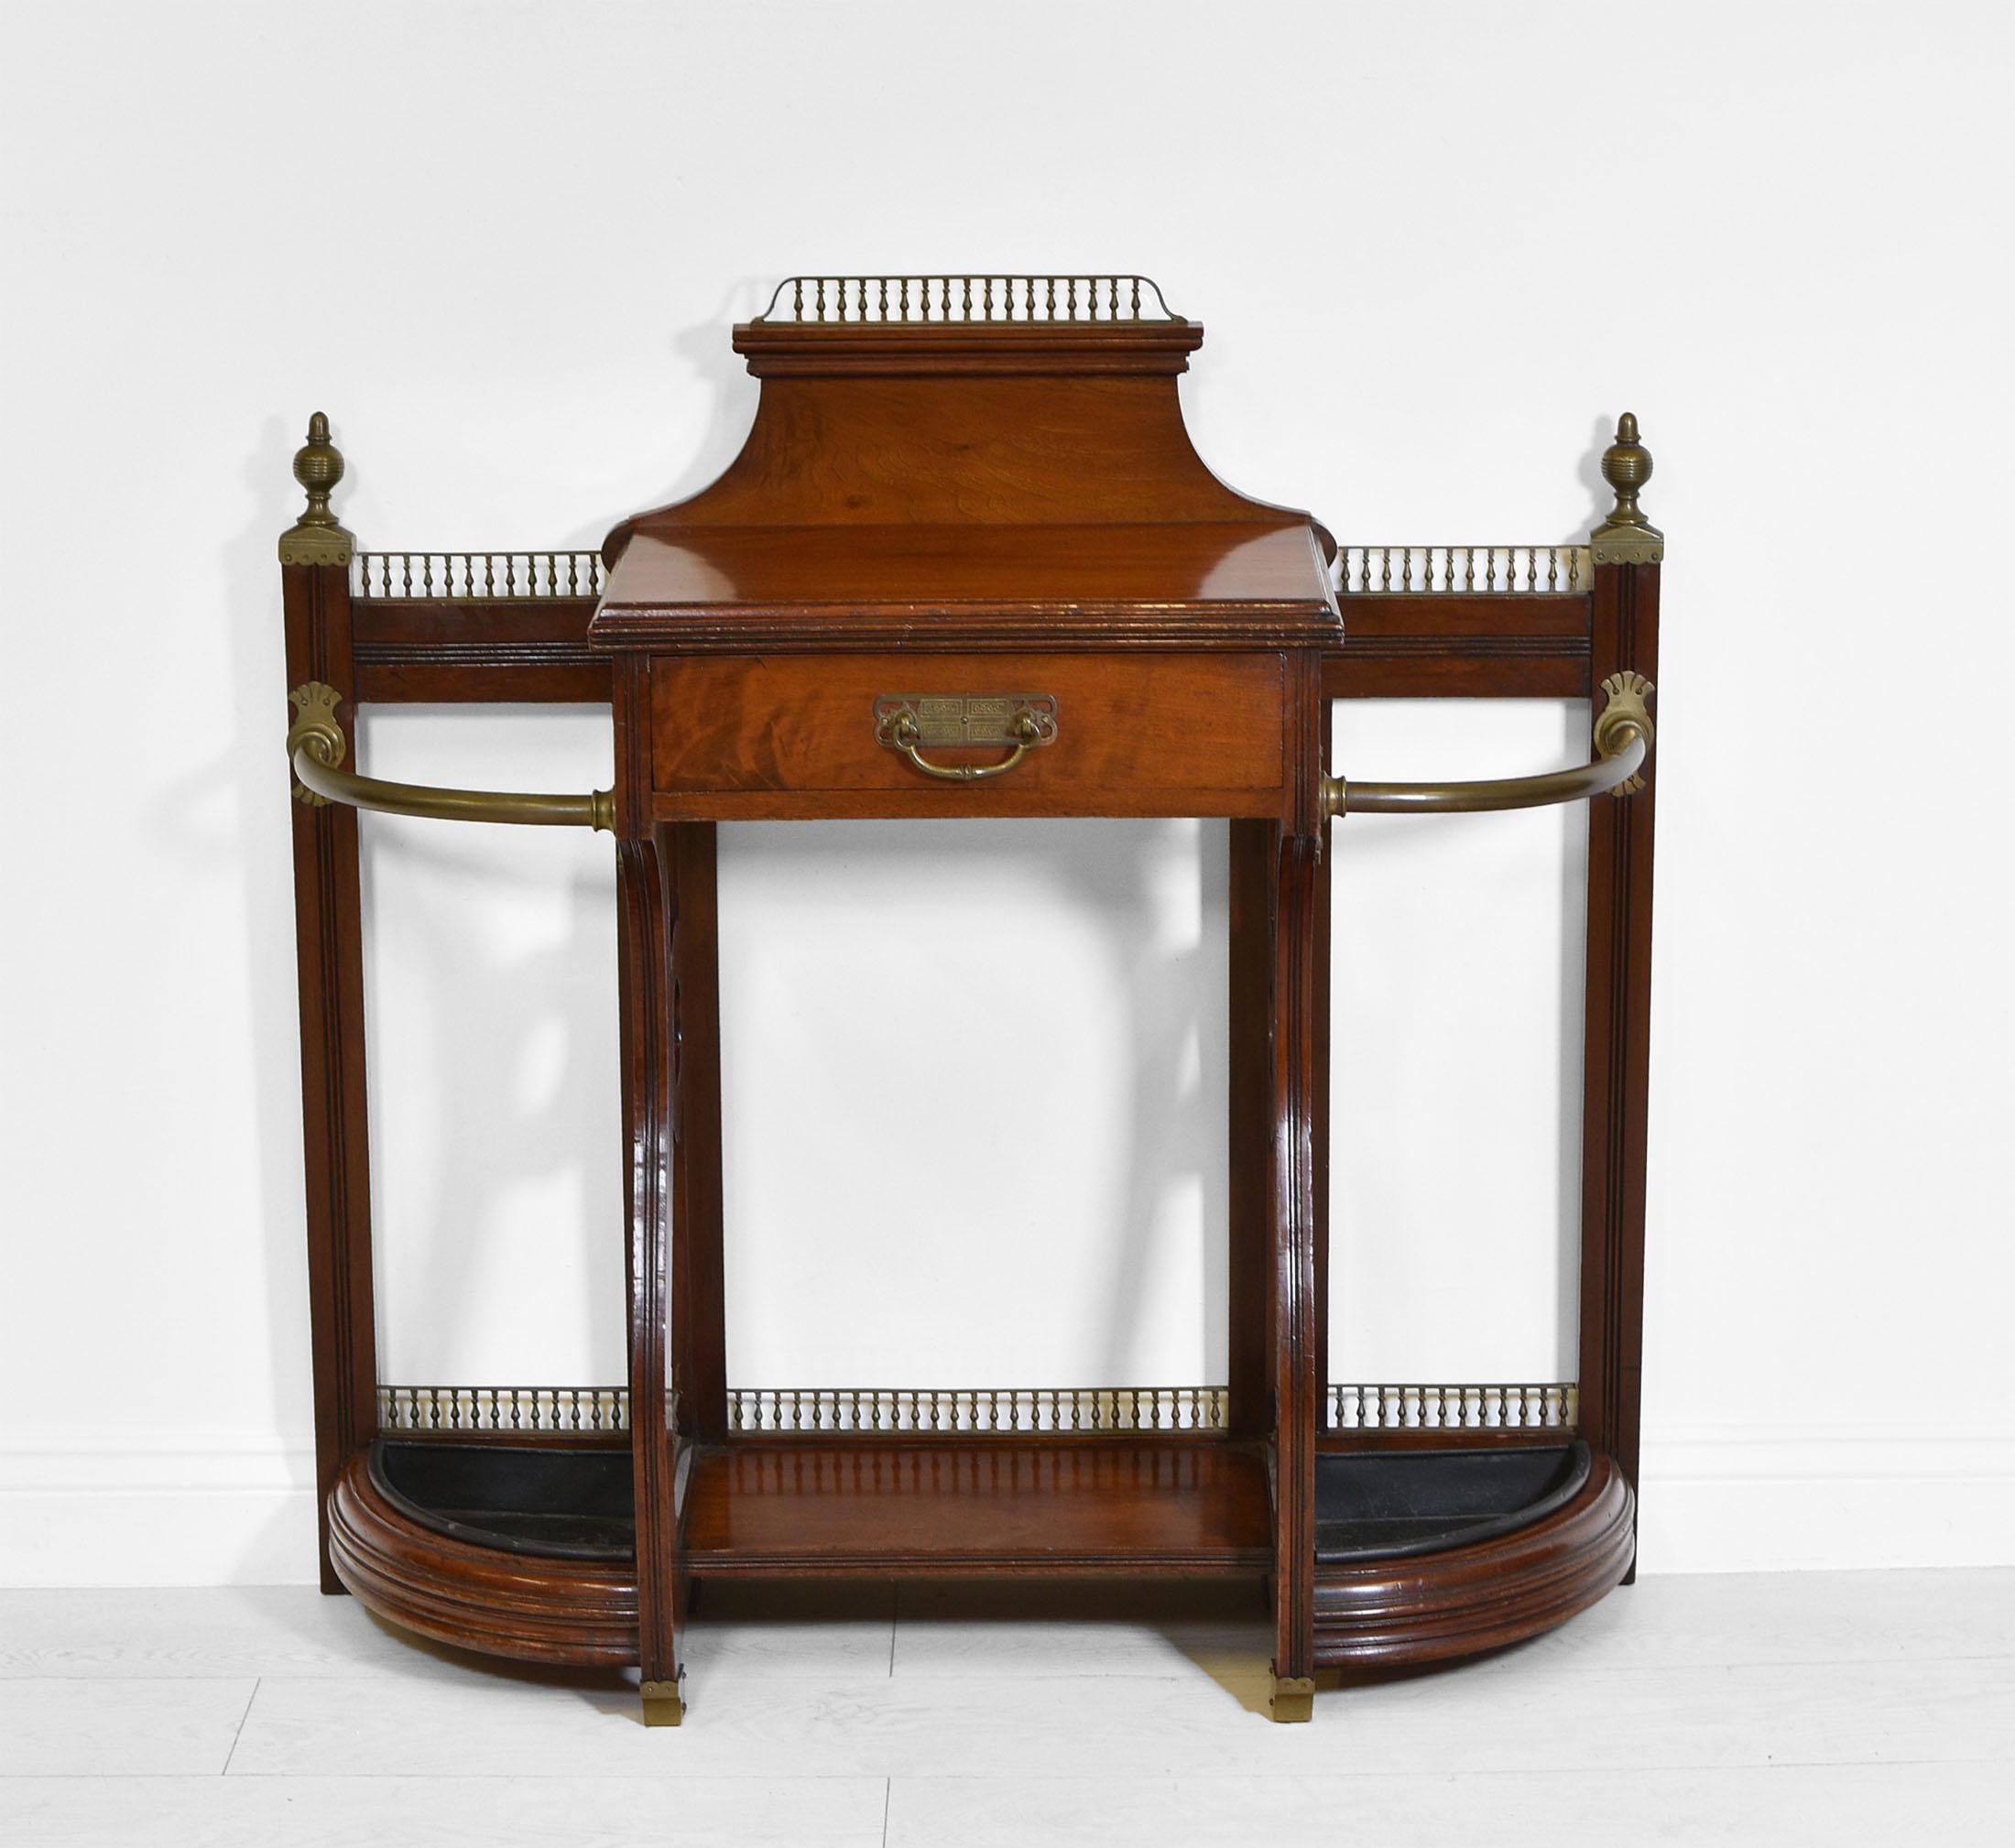 A superb Aesthetic Movement walnut and brass mount hall stand attributed to James Shoolbred - London. Kite registration stamps - Dated 1883.


James Shoolbred & Co were a firm of high quality furniture designers and manufacturers established in